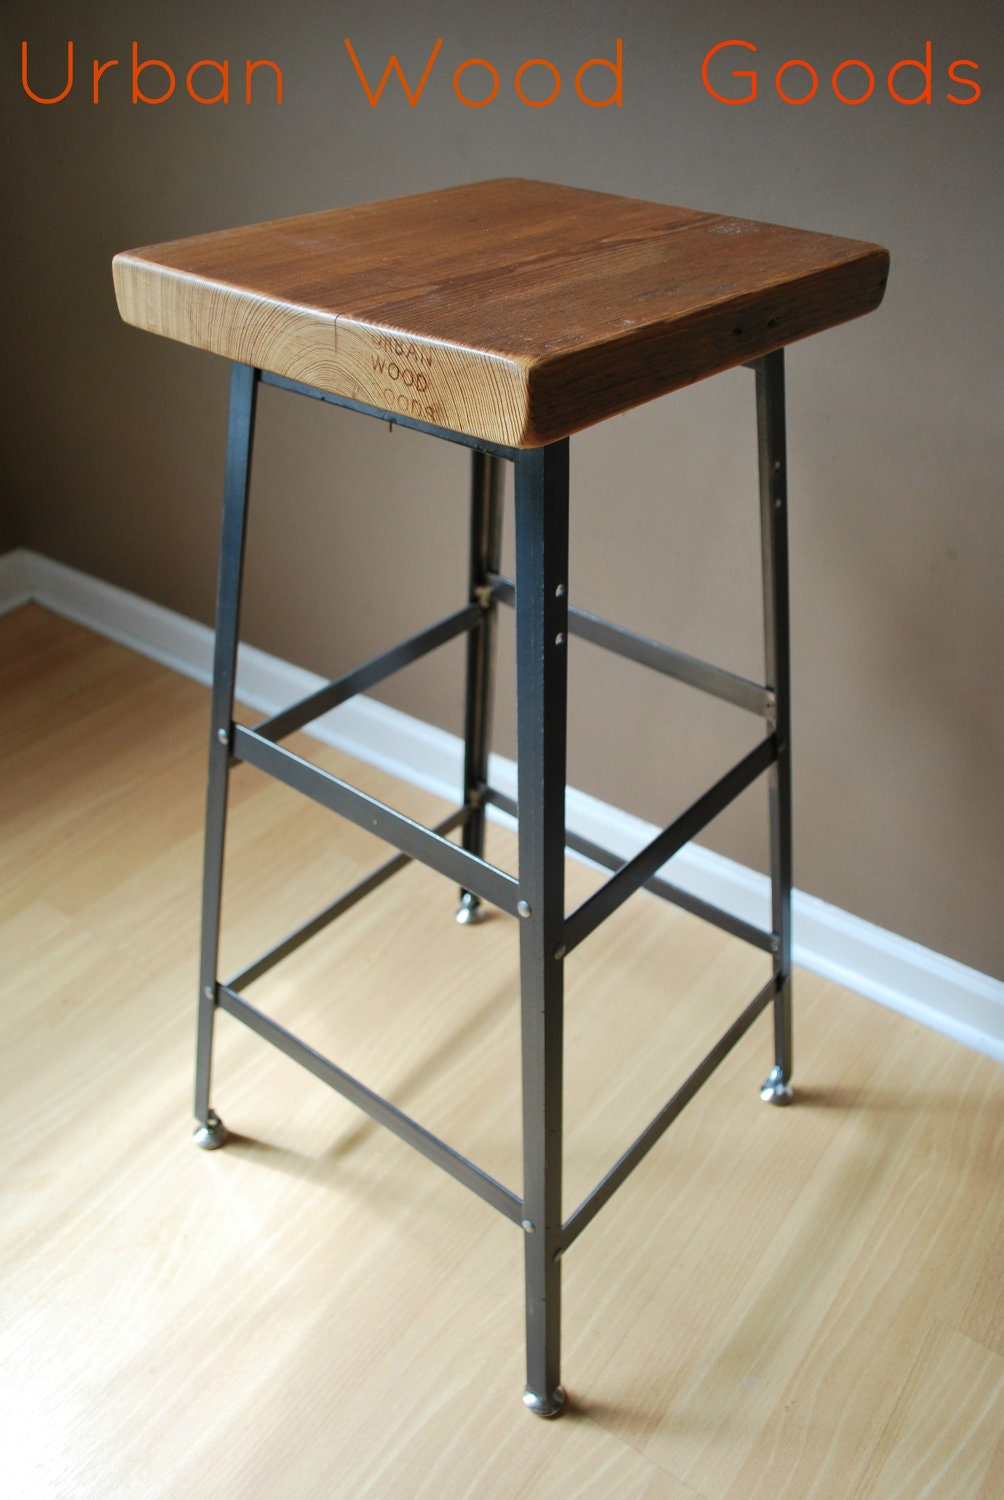 Pair of 30" Bar Height Reclaimed Wood and steel industrial shop Stool. made in chicago